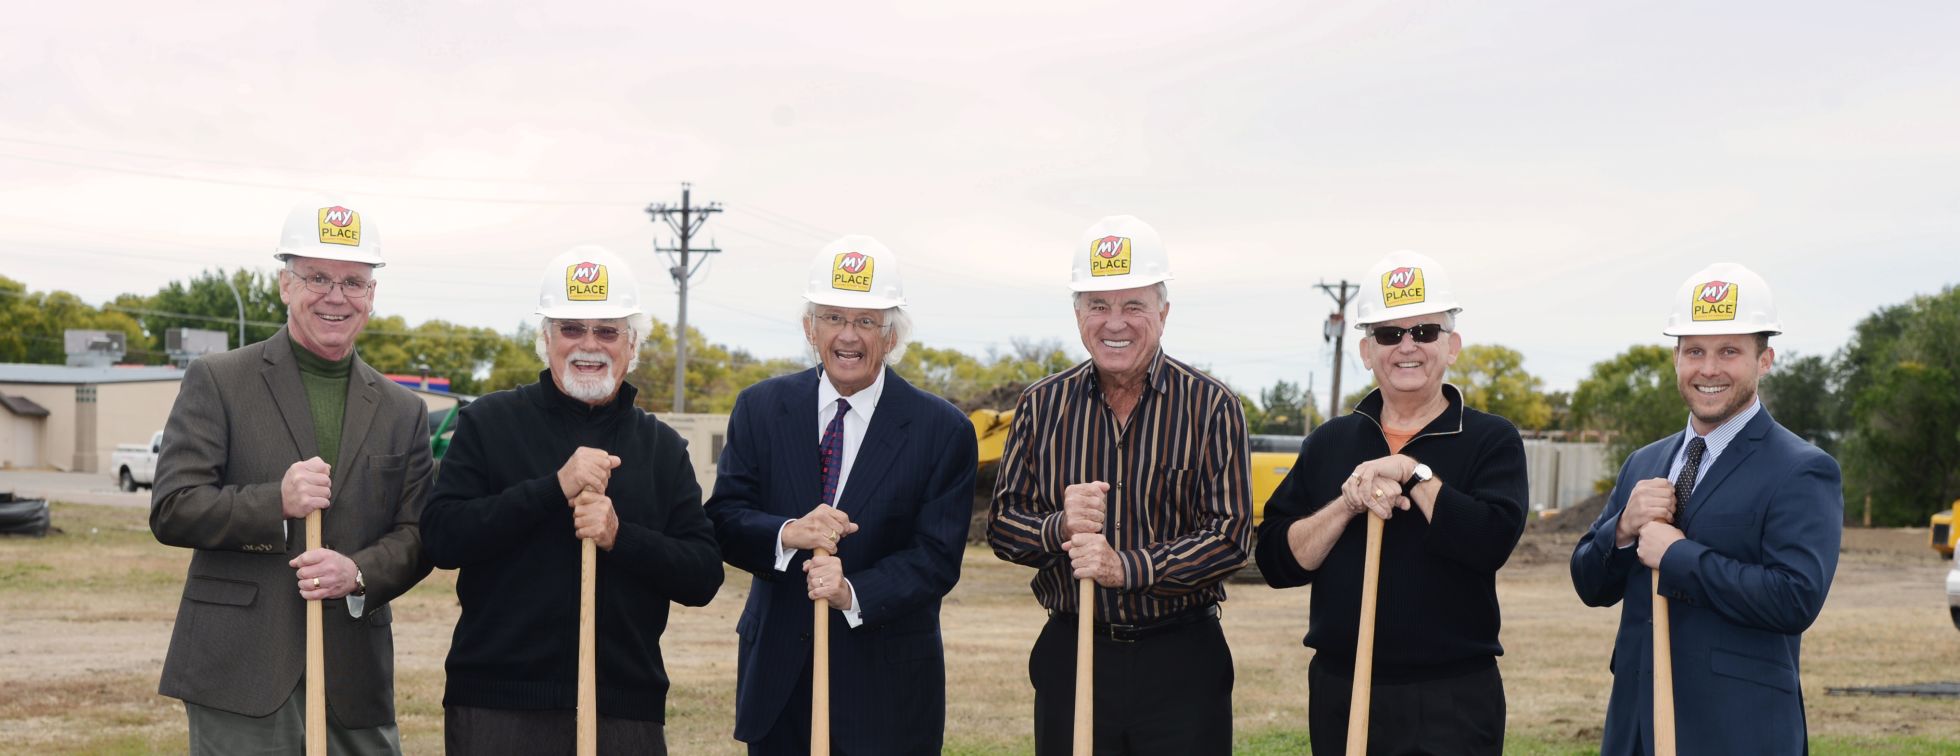 Six of My Place Hotel's corporate team members breaking ground with shovels and hard hats